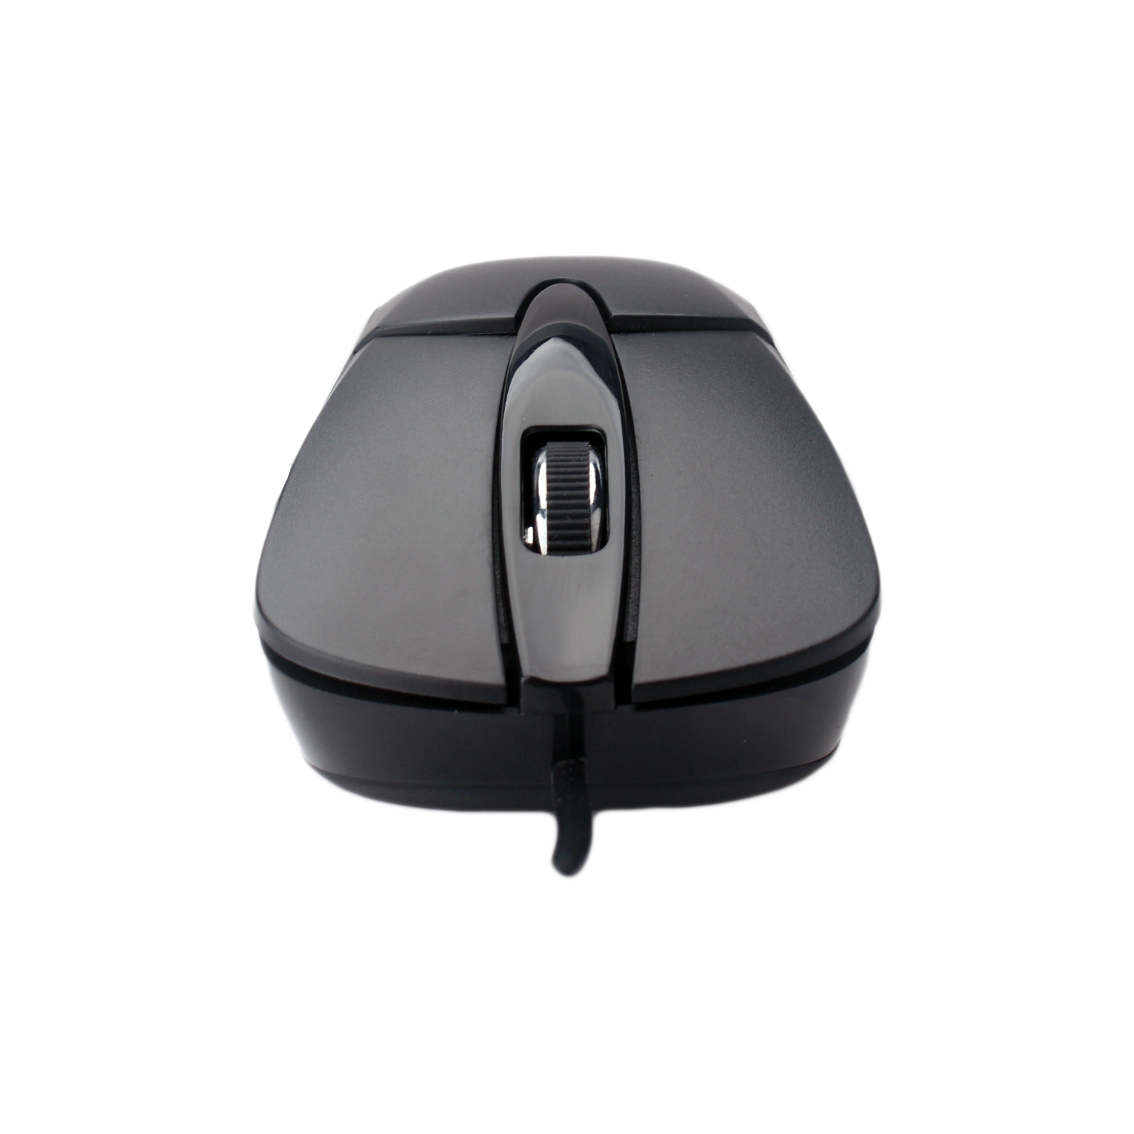 Computer Mouse with High Quality,PixArt 7515 Chipset, HUANO Brand Switch 3 Million Clicks